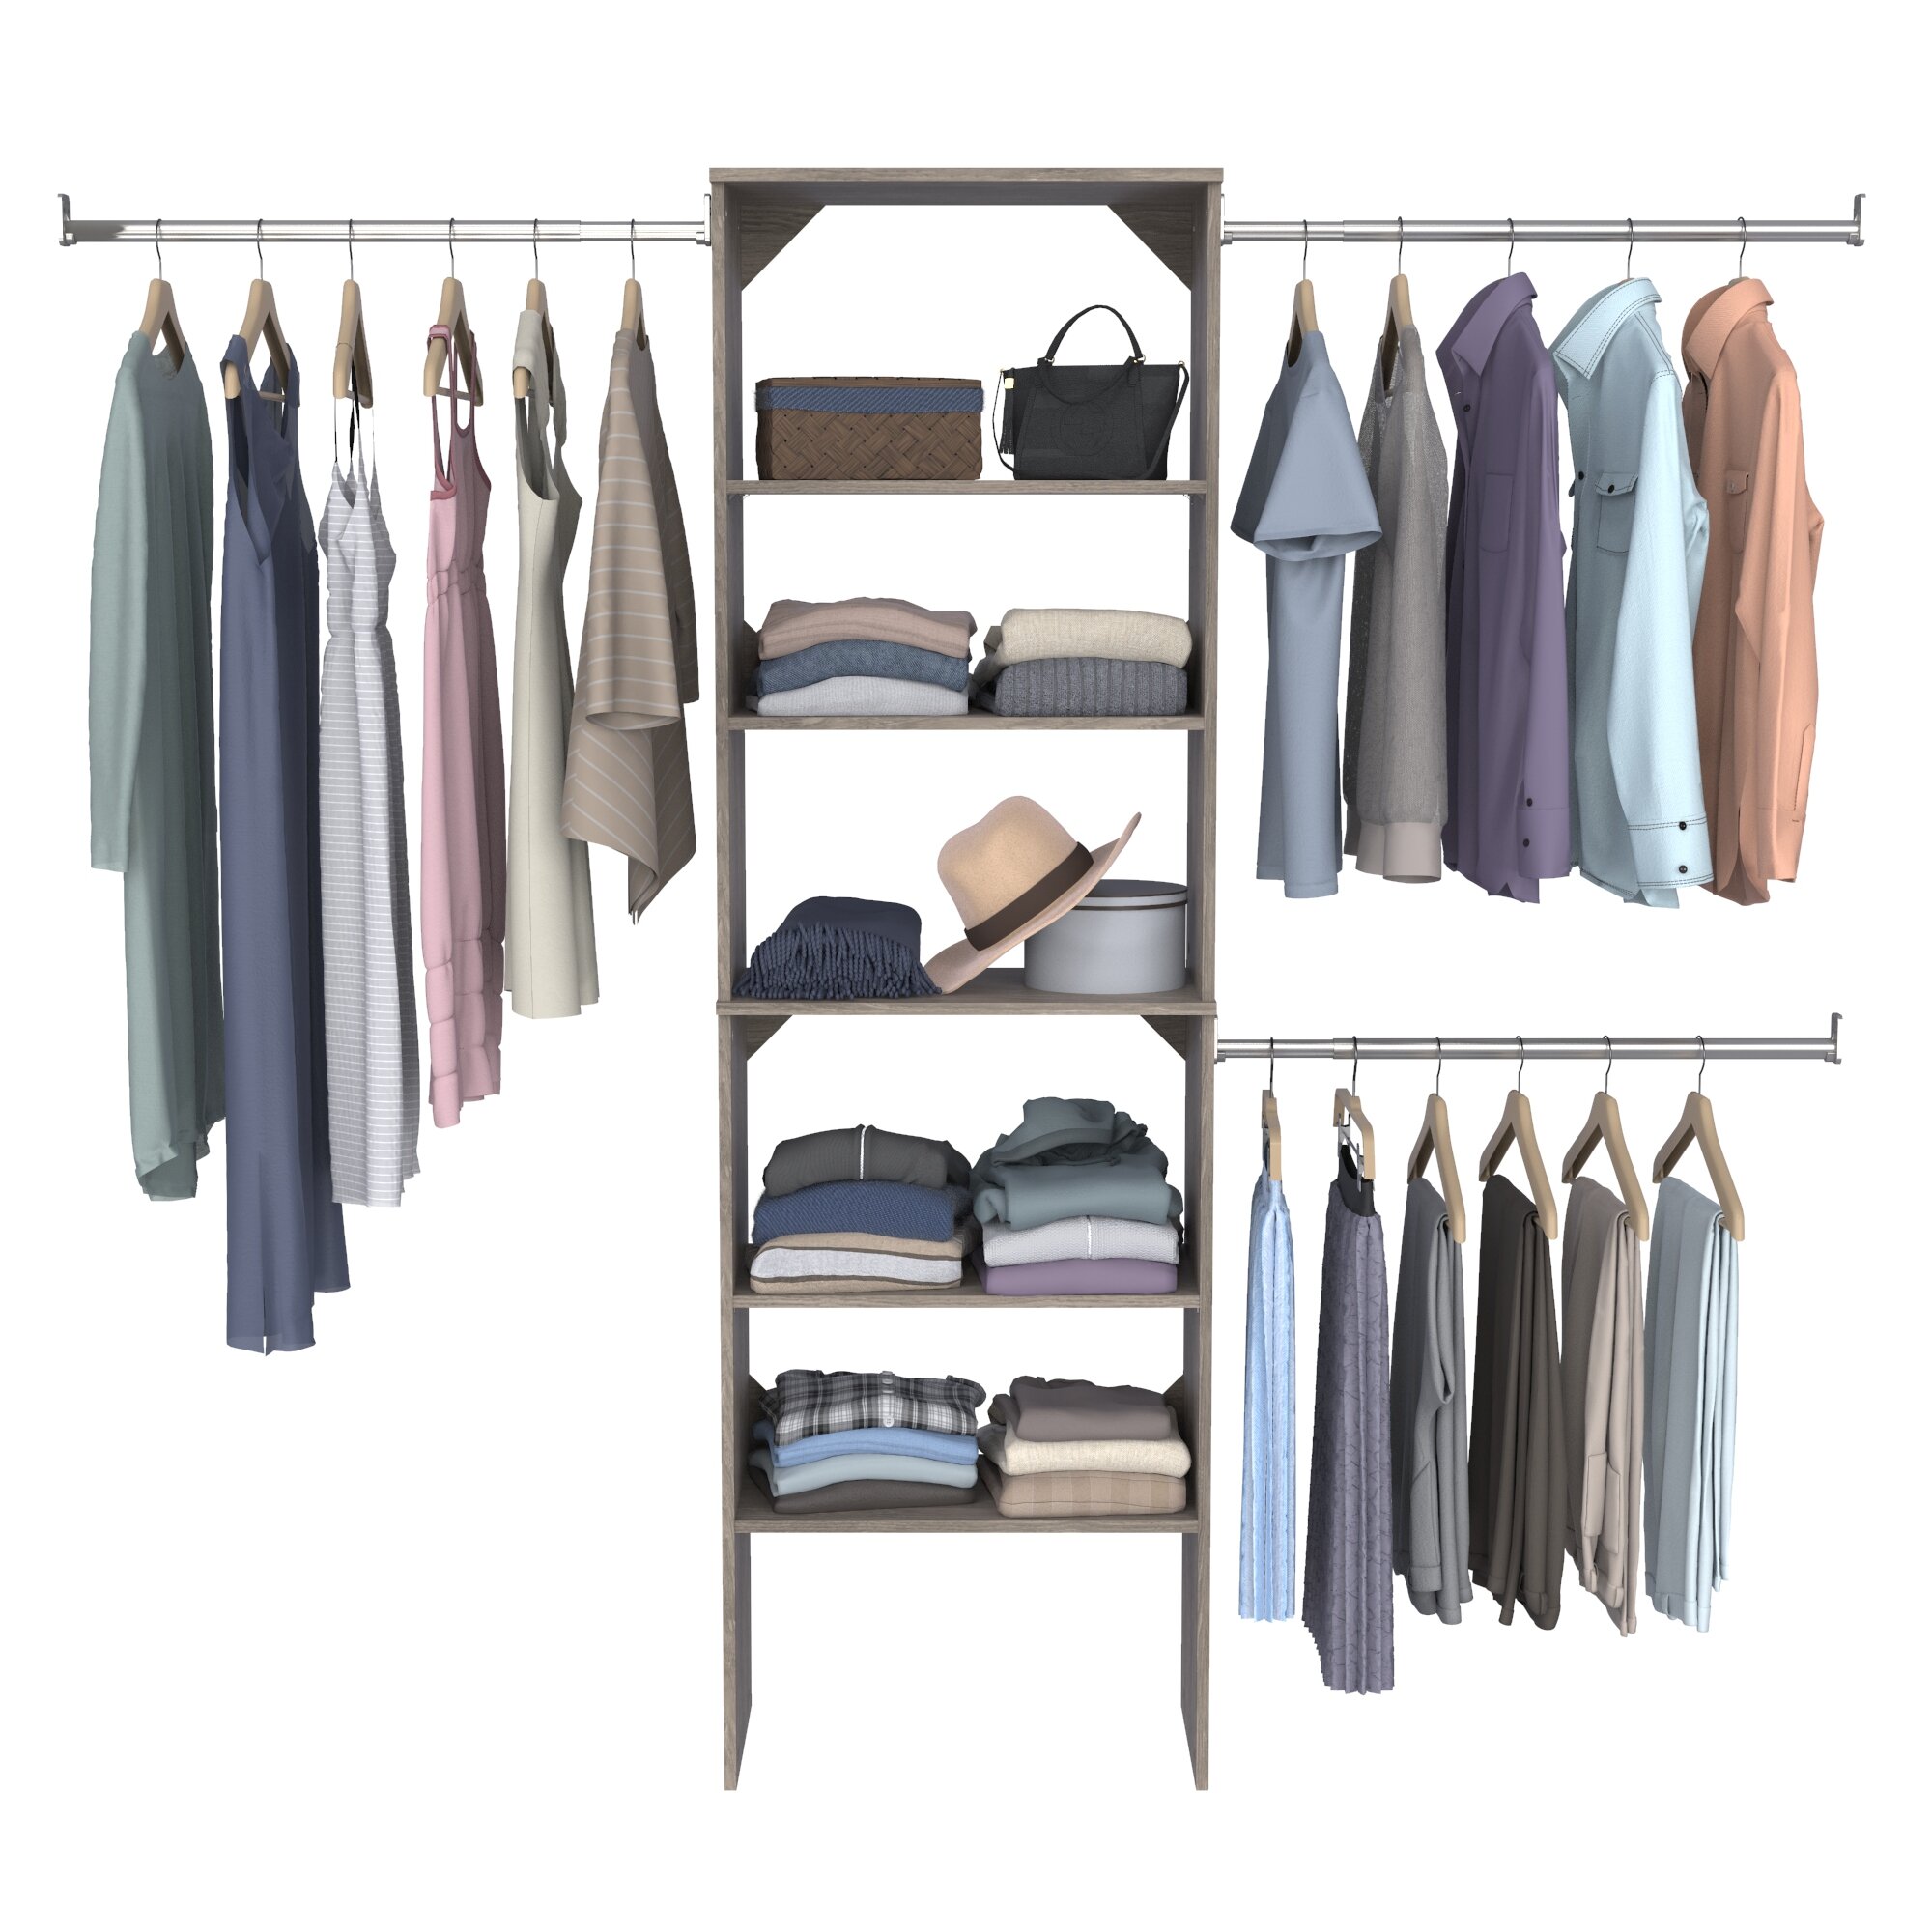 Pro Cloth Closet Organizer Shelves Stand Clothes Storage Stainless Steel Rack US 